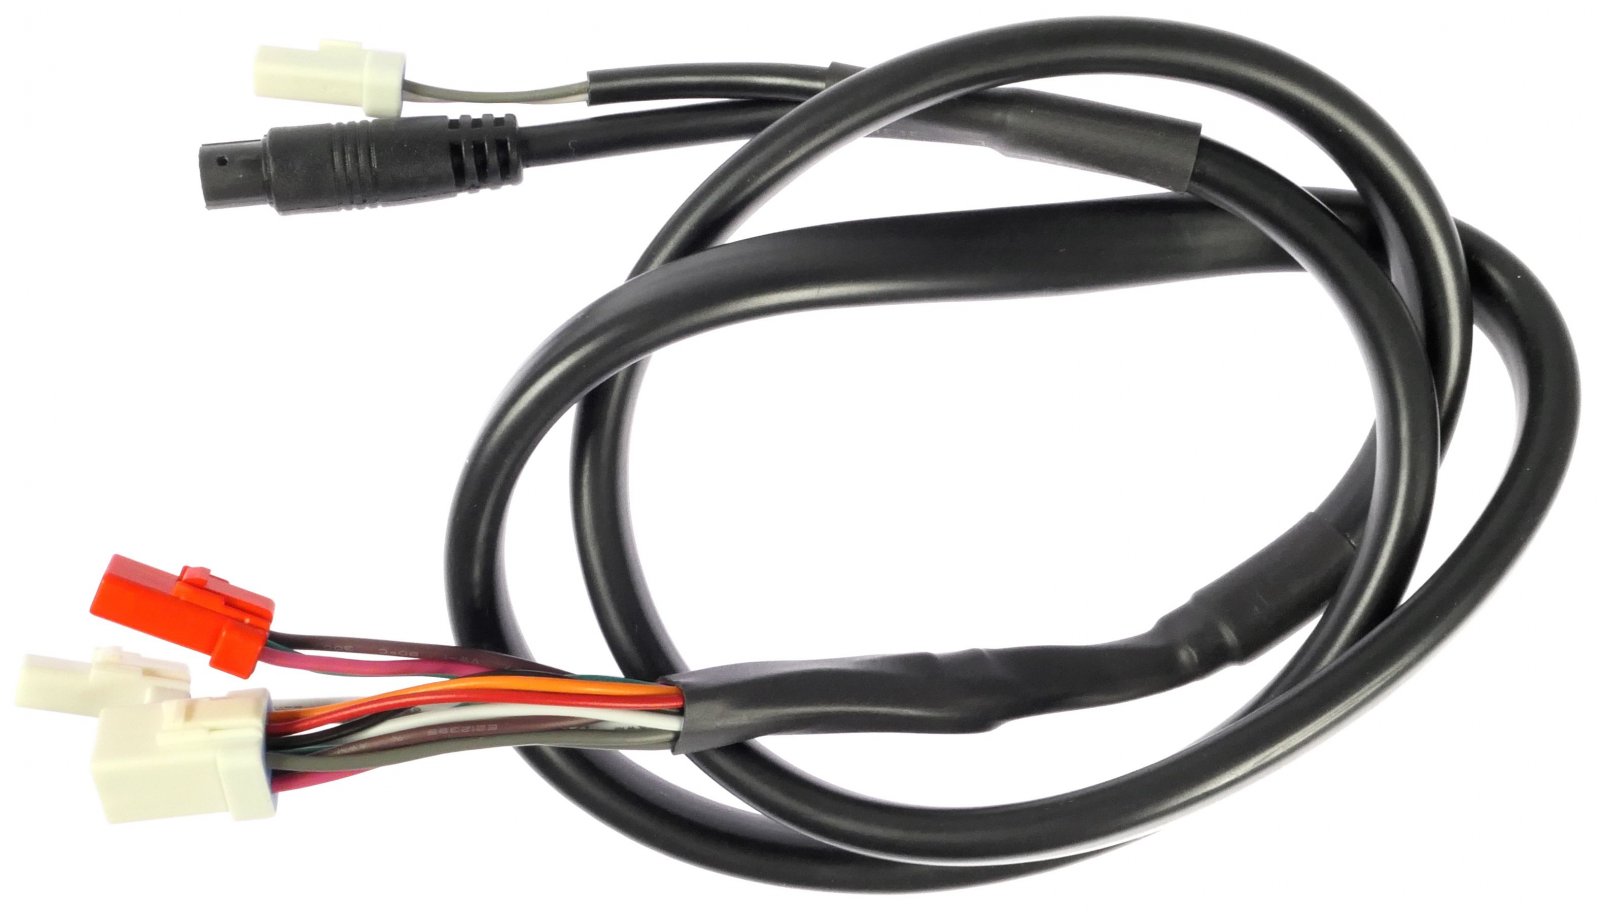 giant-cable-lumiere-display-moteur-giant-syncdrive_3840x2160.jpg